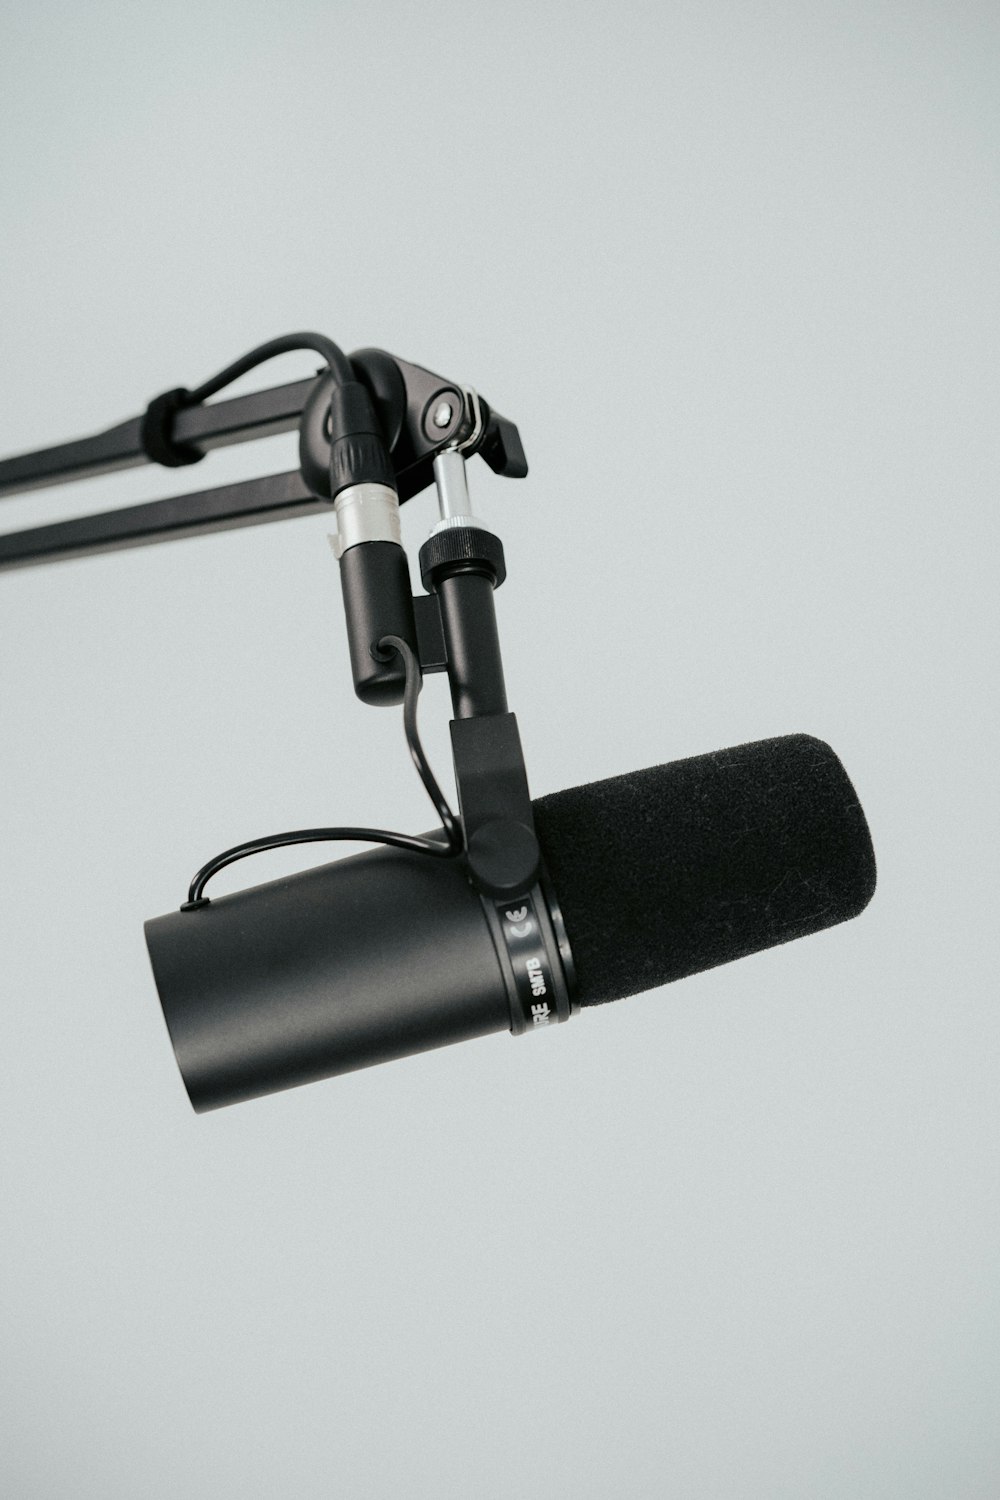 a microphone attached to a stand with a microphone attached to it